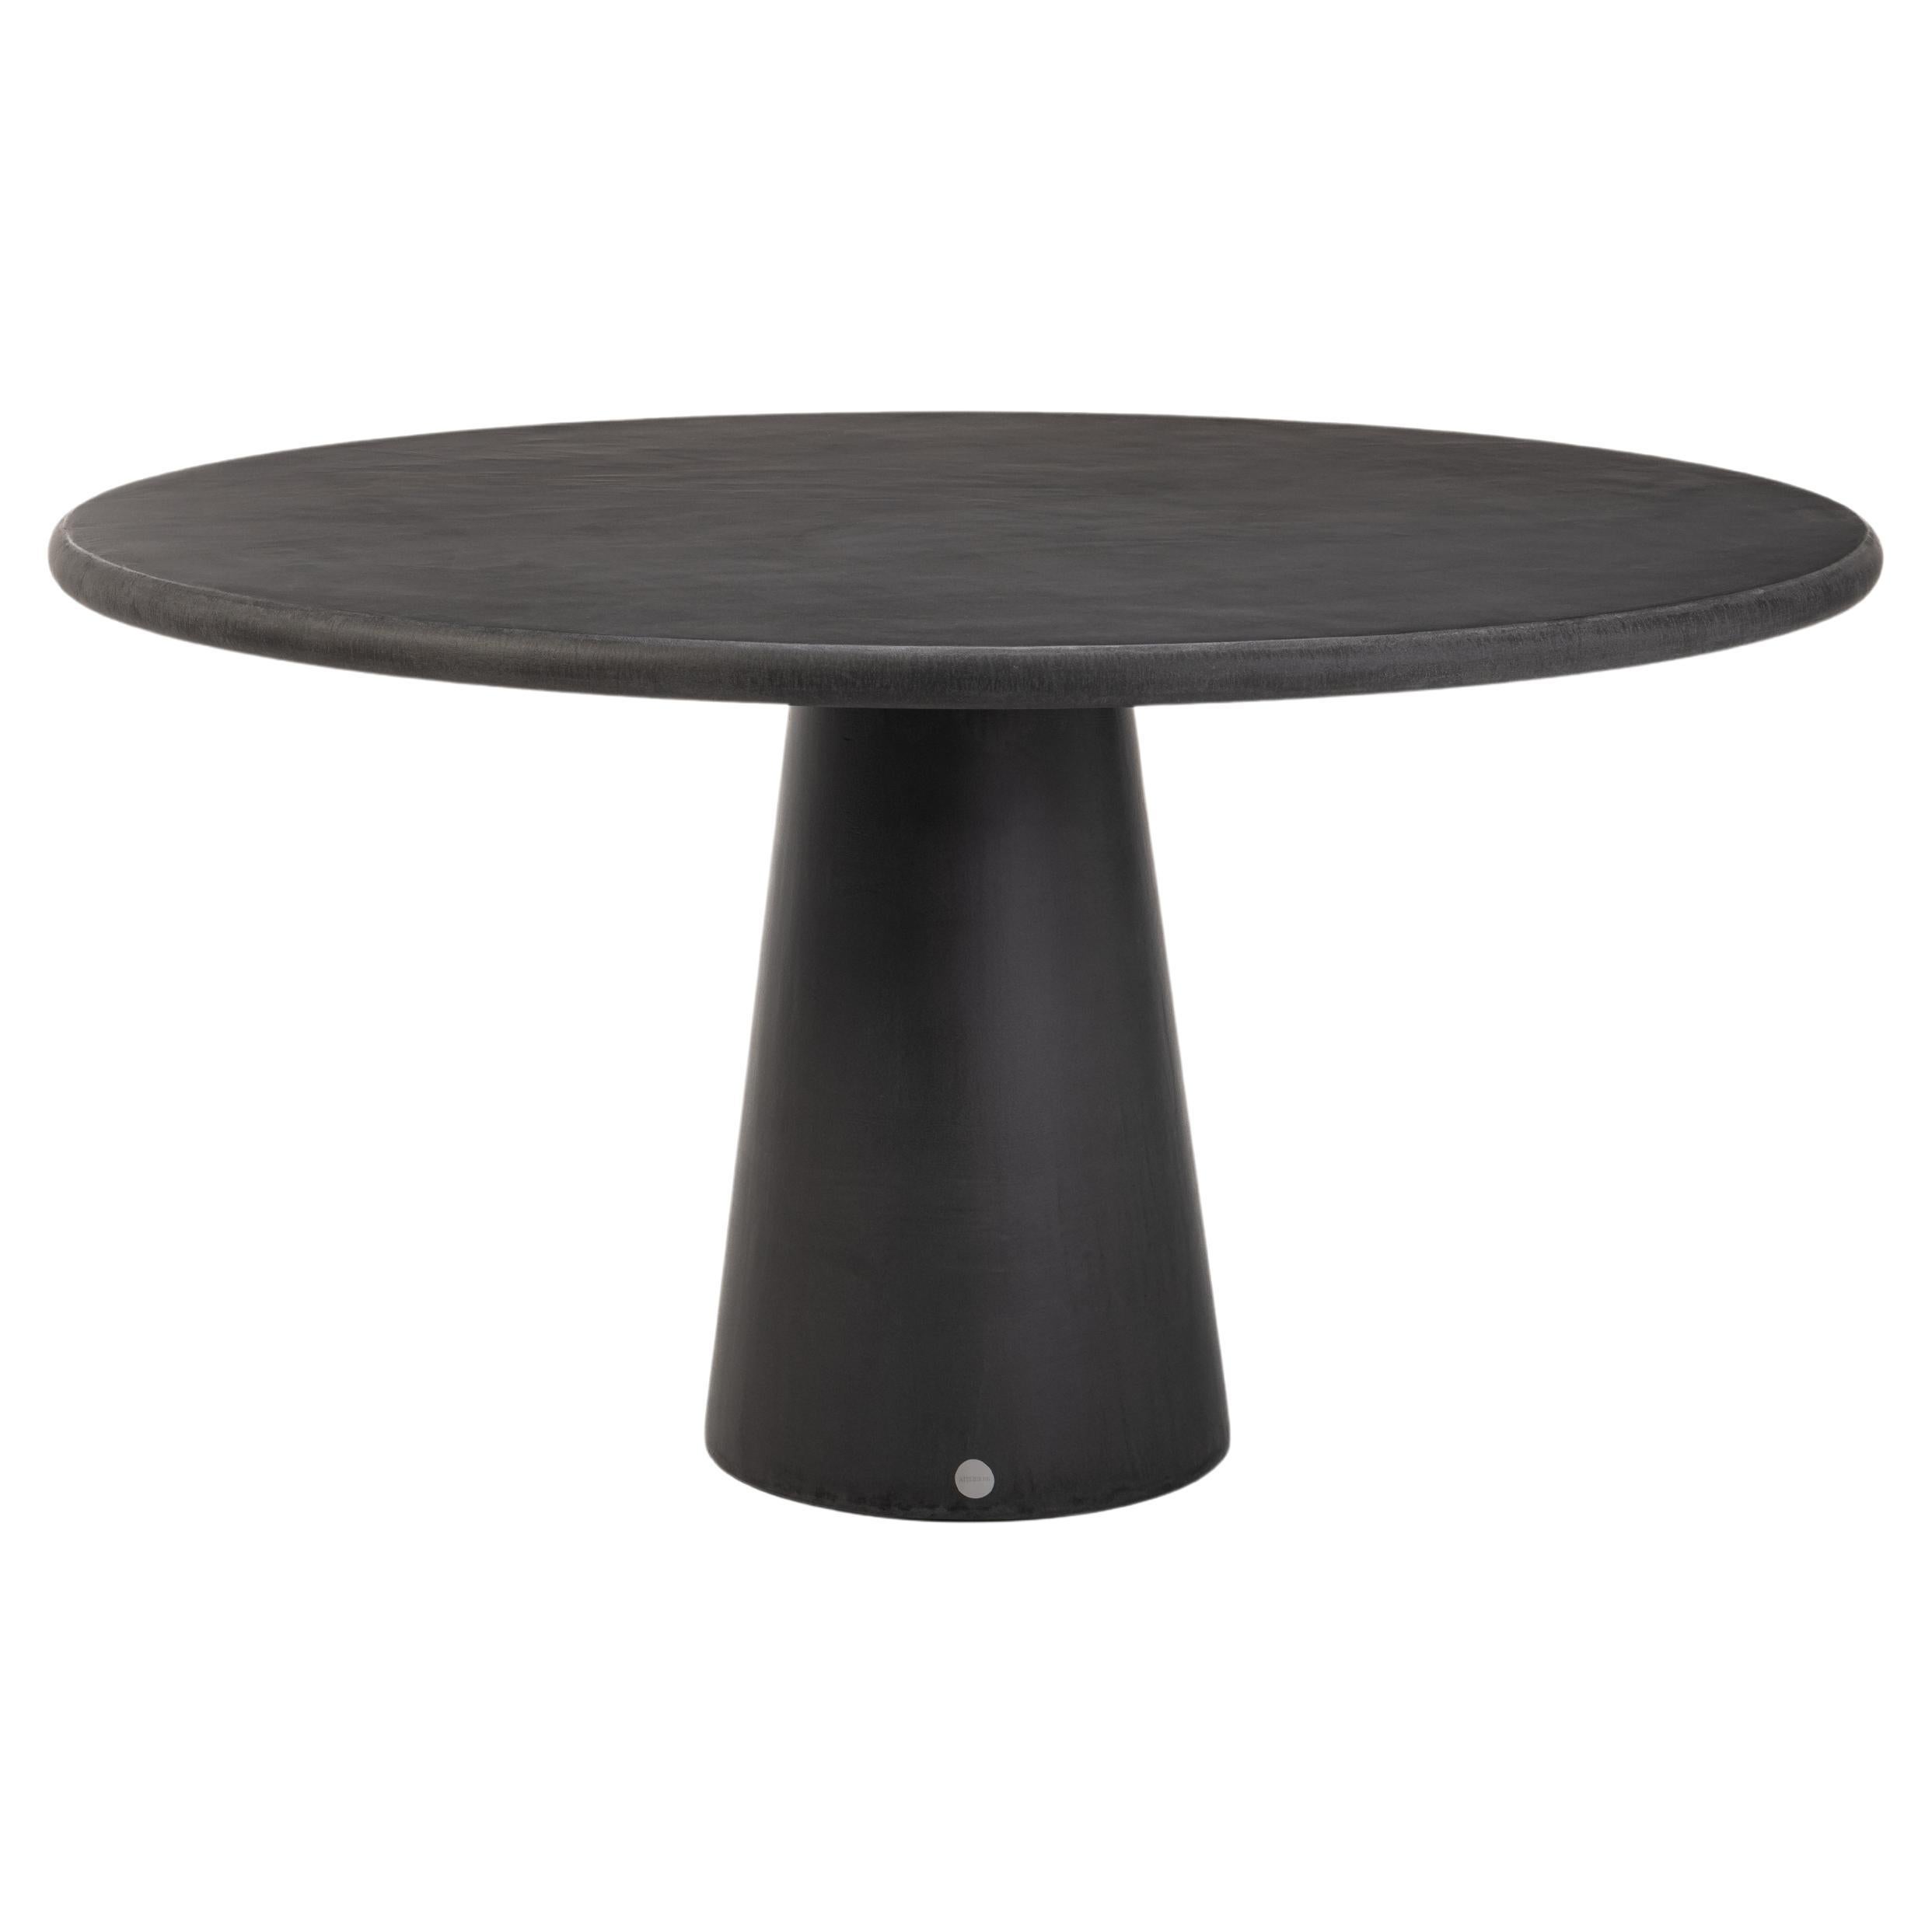 Round Natural Plaster Dining Table "Cone" 140 by Isabelle Beaumont For Sale